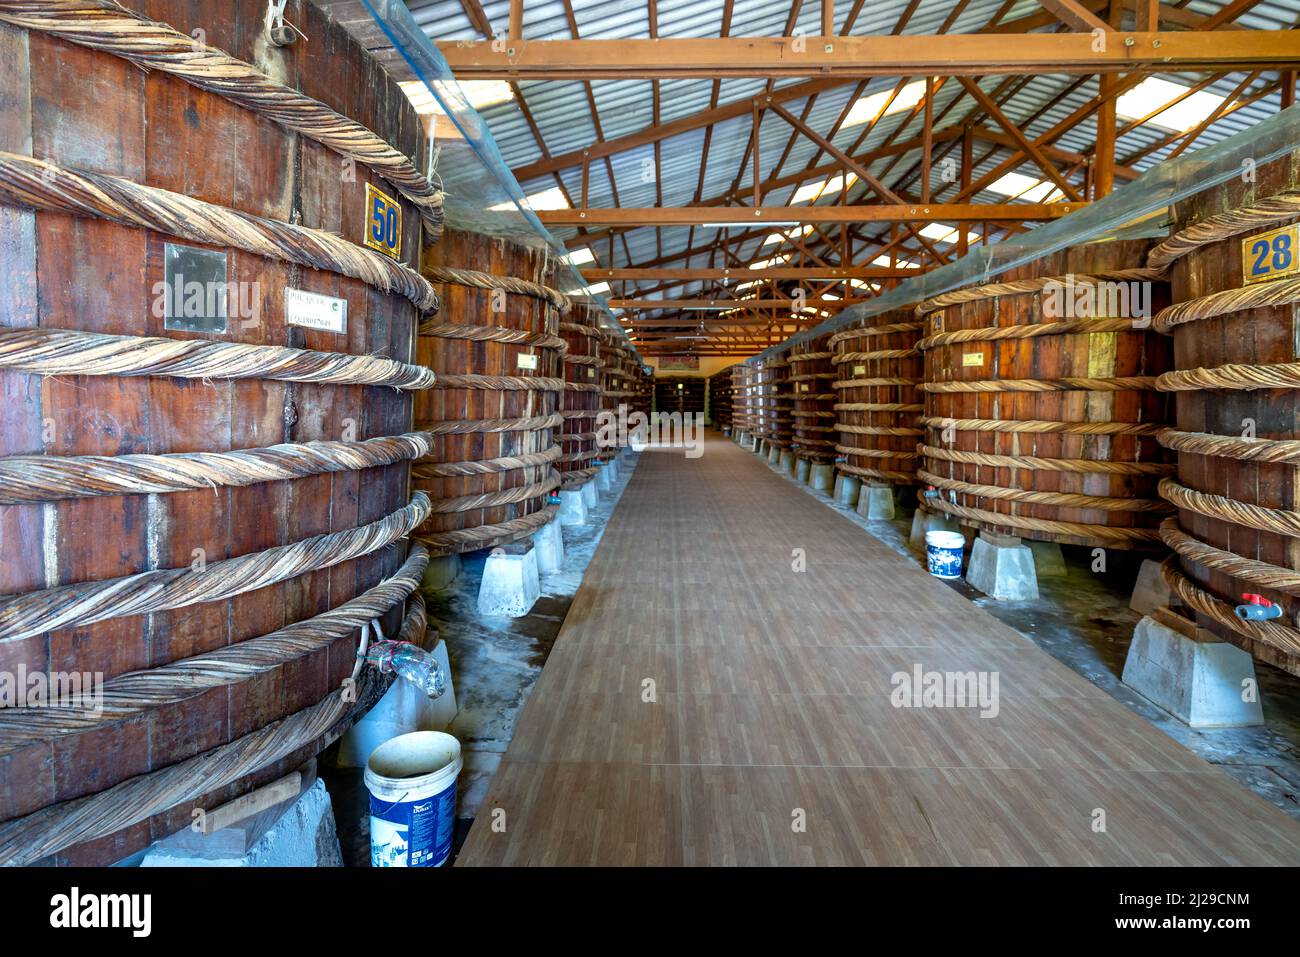 Phu Quoc Island, Vietnam - February 24, 2022: At the fish sauce production facility, the factory on Phu Quoc island follows the traditional fermentati Stock Photo